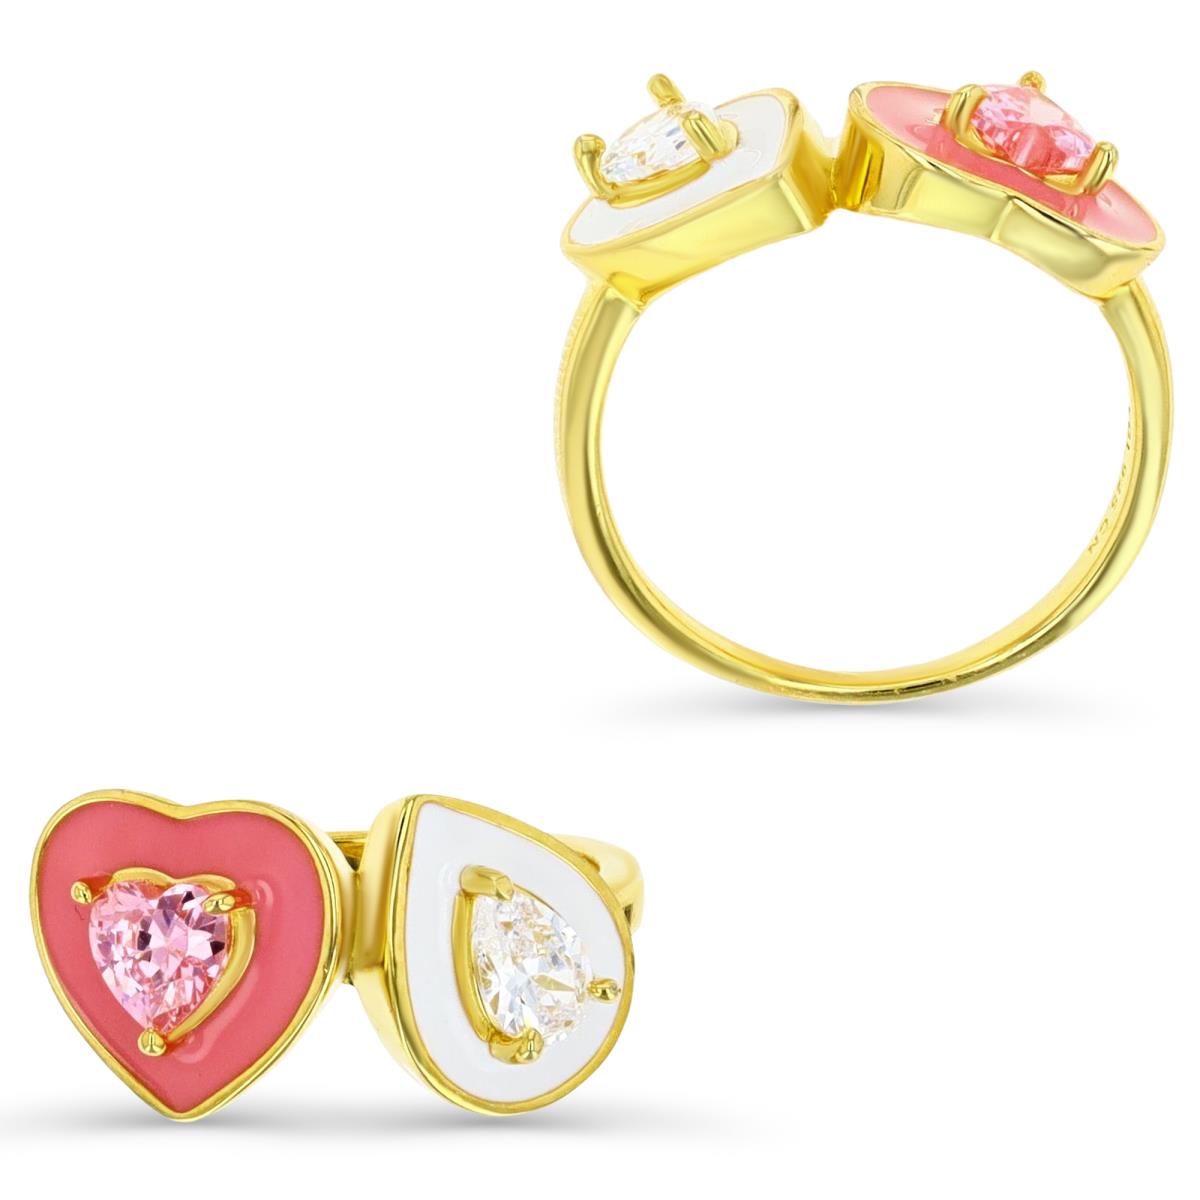 Sterling Silver Yellow 1M & White Pear-Shaped and Pink Heart-Shaped CZ and Enamel Ring